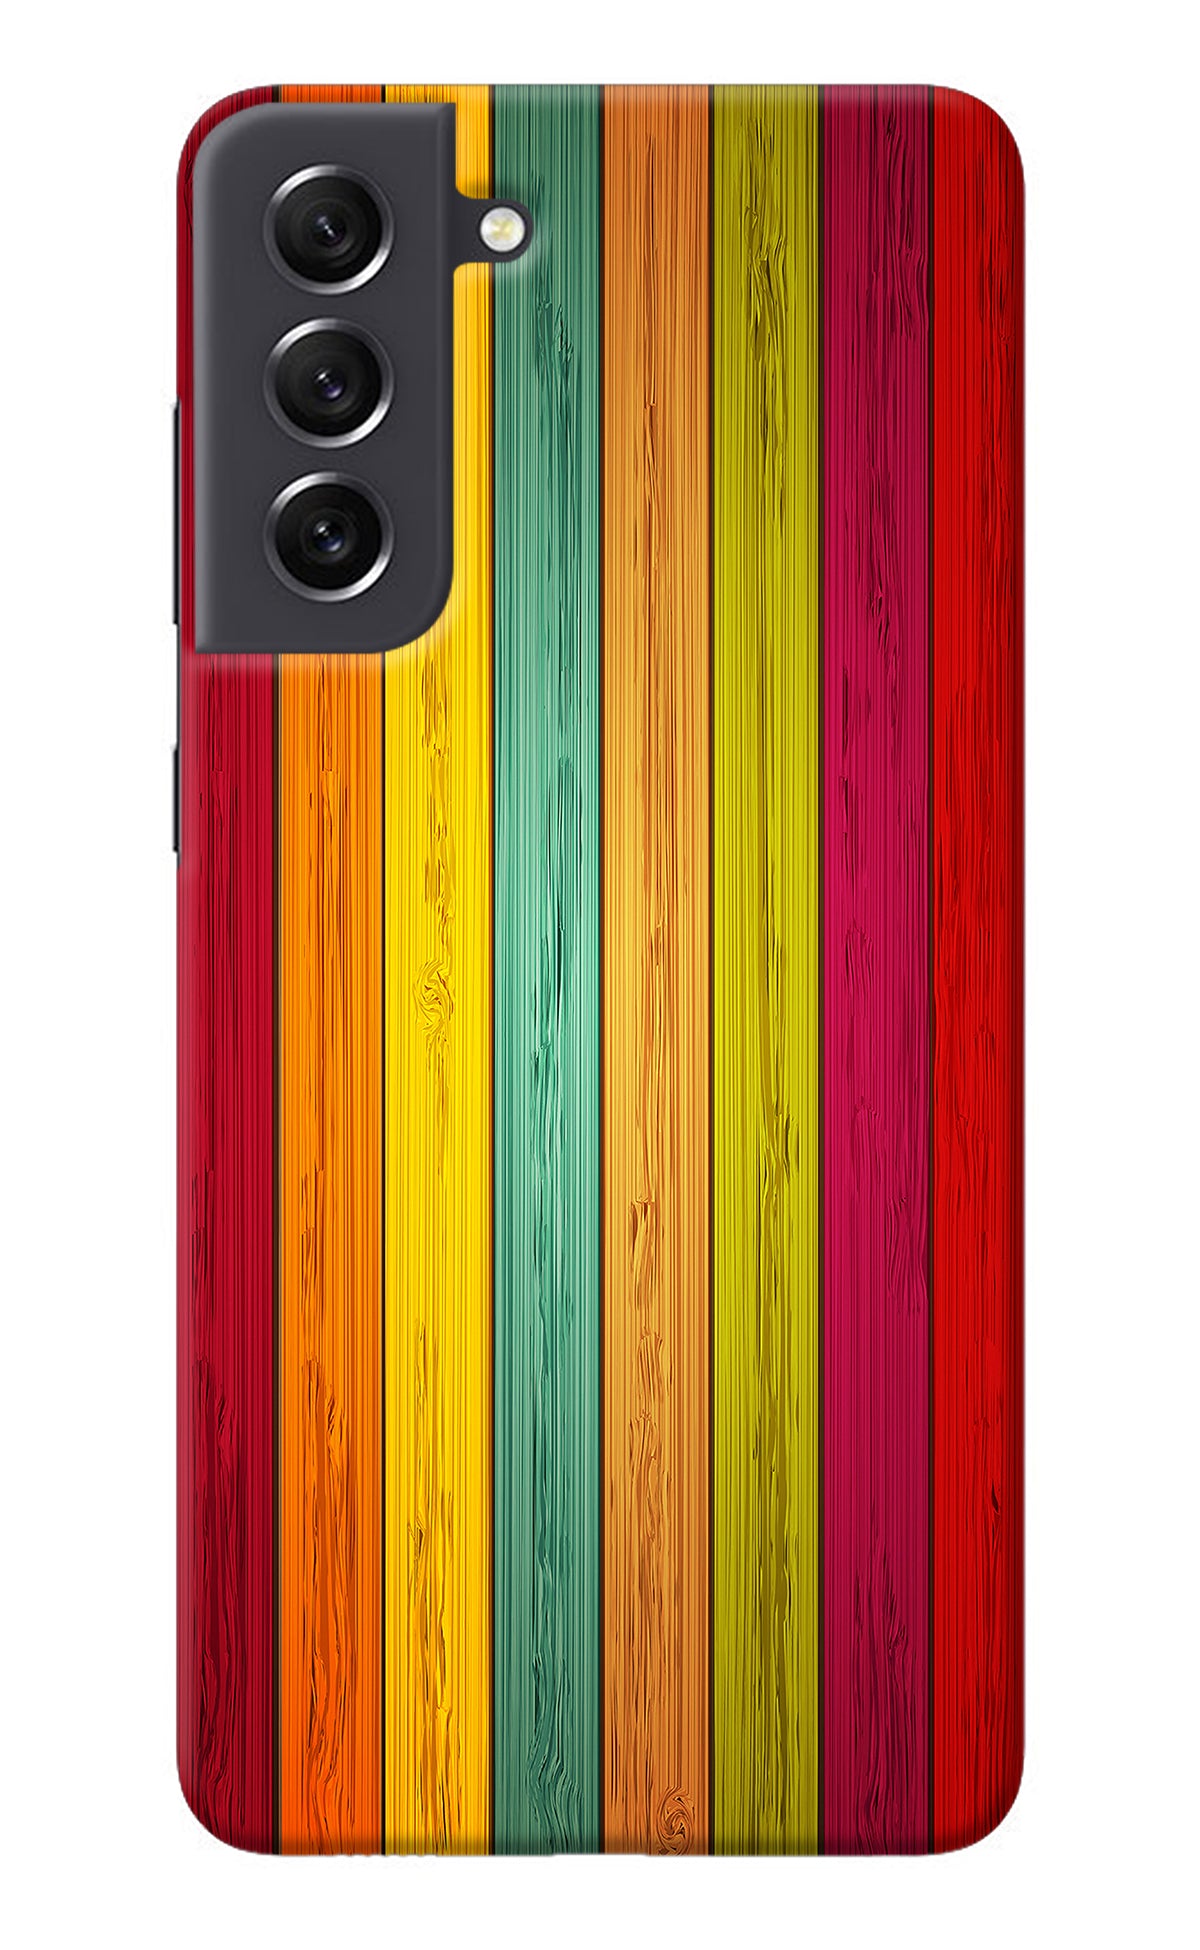 Multicolor Wooden Samsung S21 FE 5G Back Cover